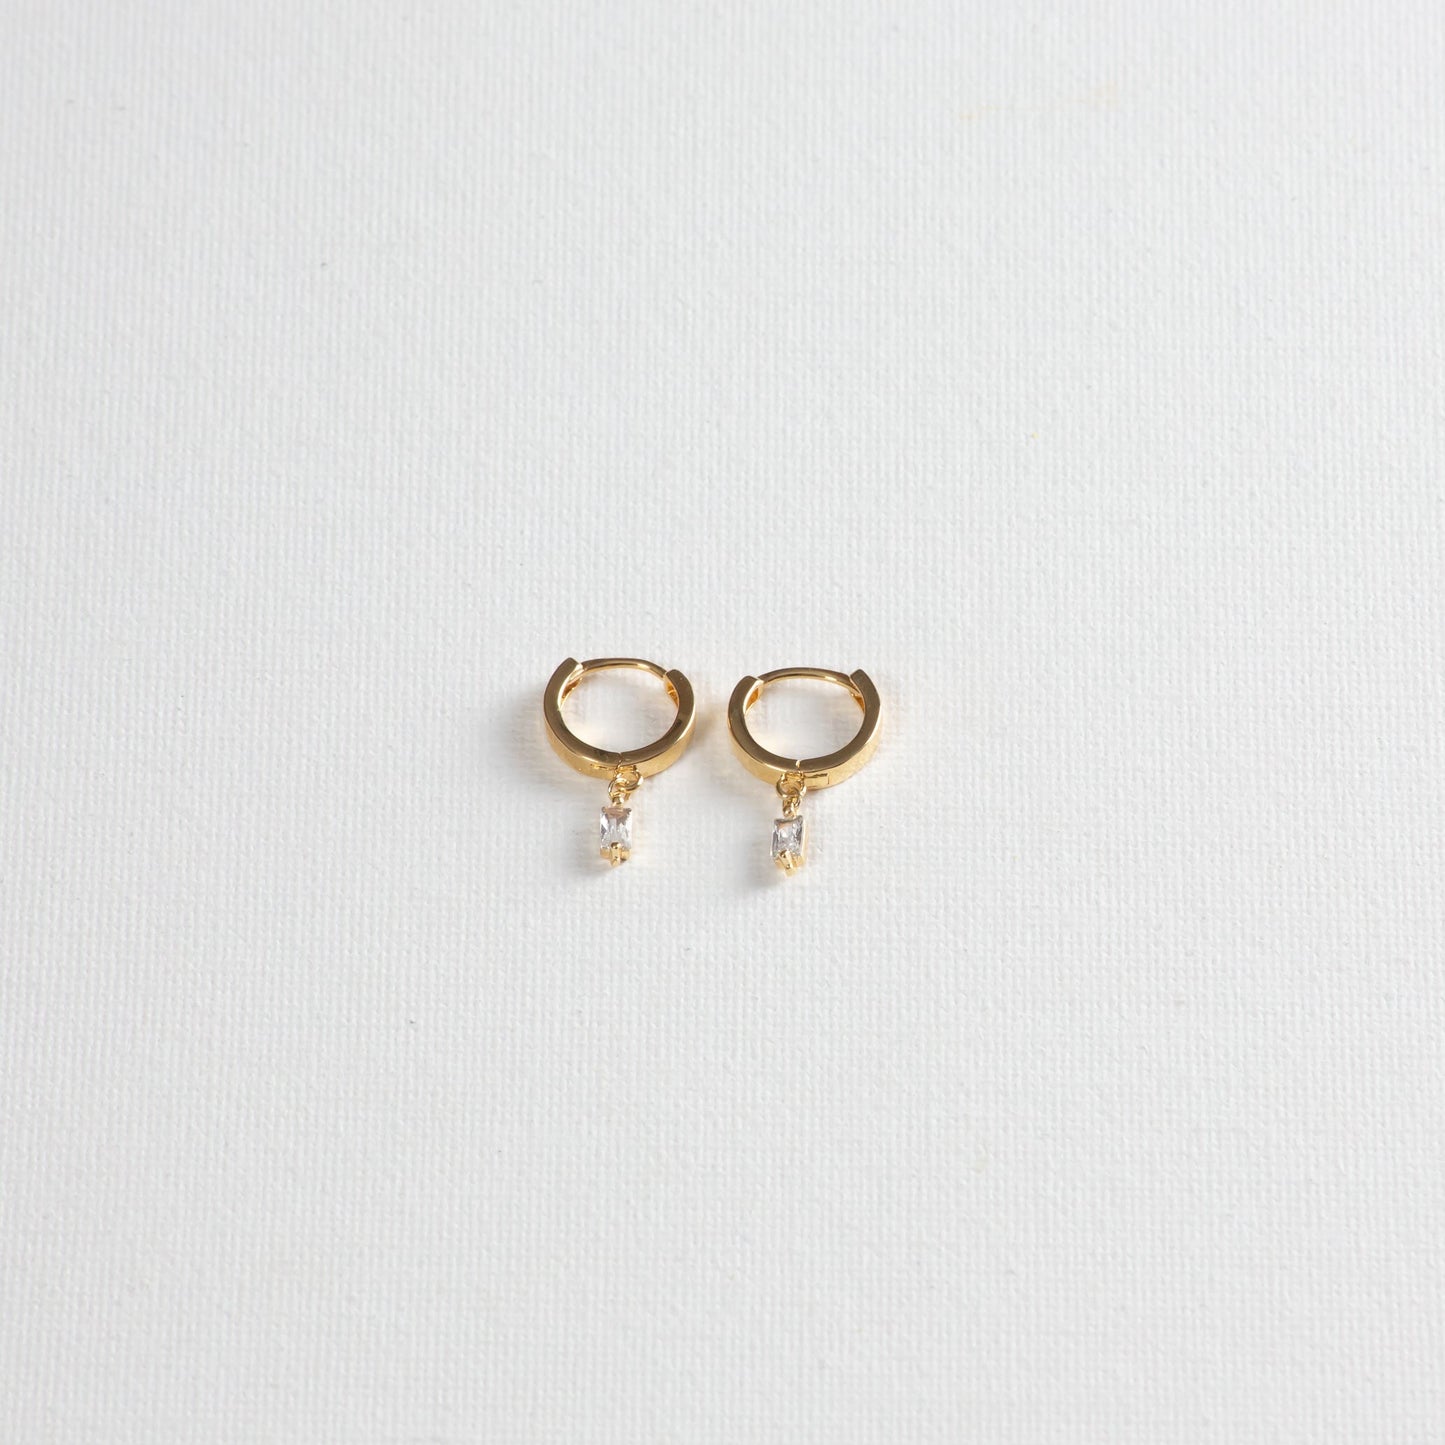 Small hoop earrings with mini baguette crystal charms, showcased on a clean white background.